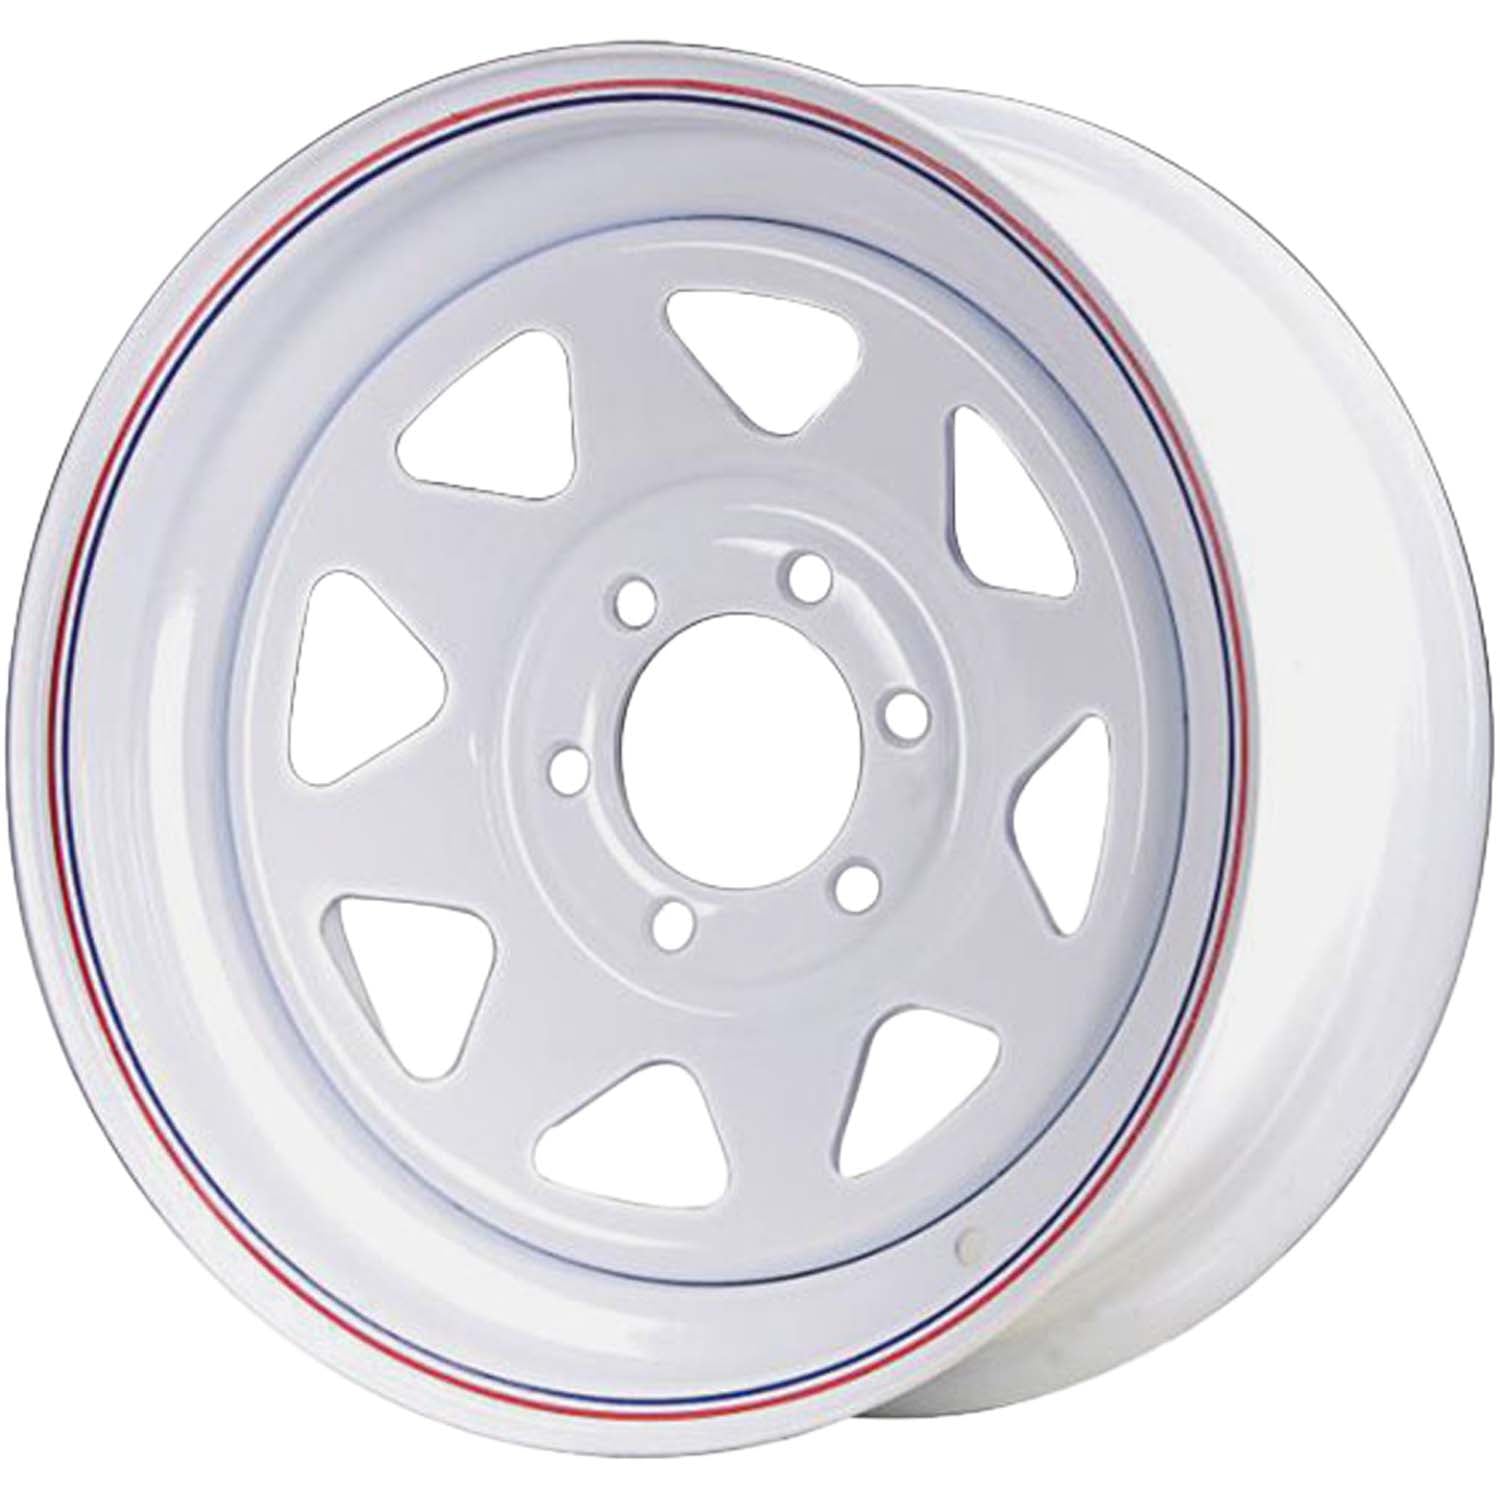 16x6 6 On 5.5 Spoked Steel Trailer Wheel - White with Pin Stripes